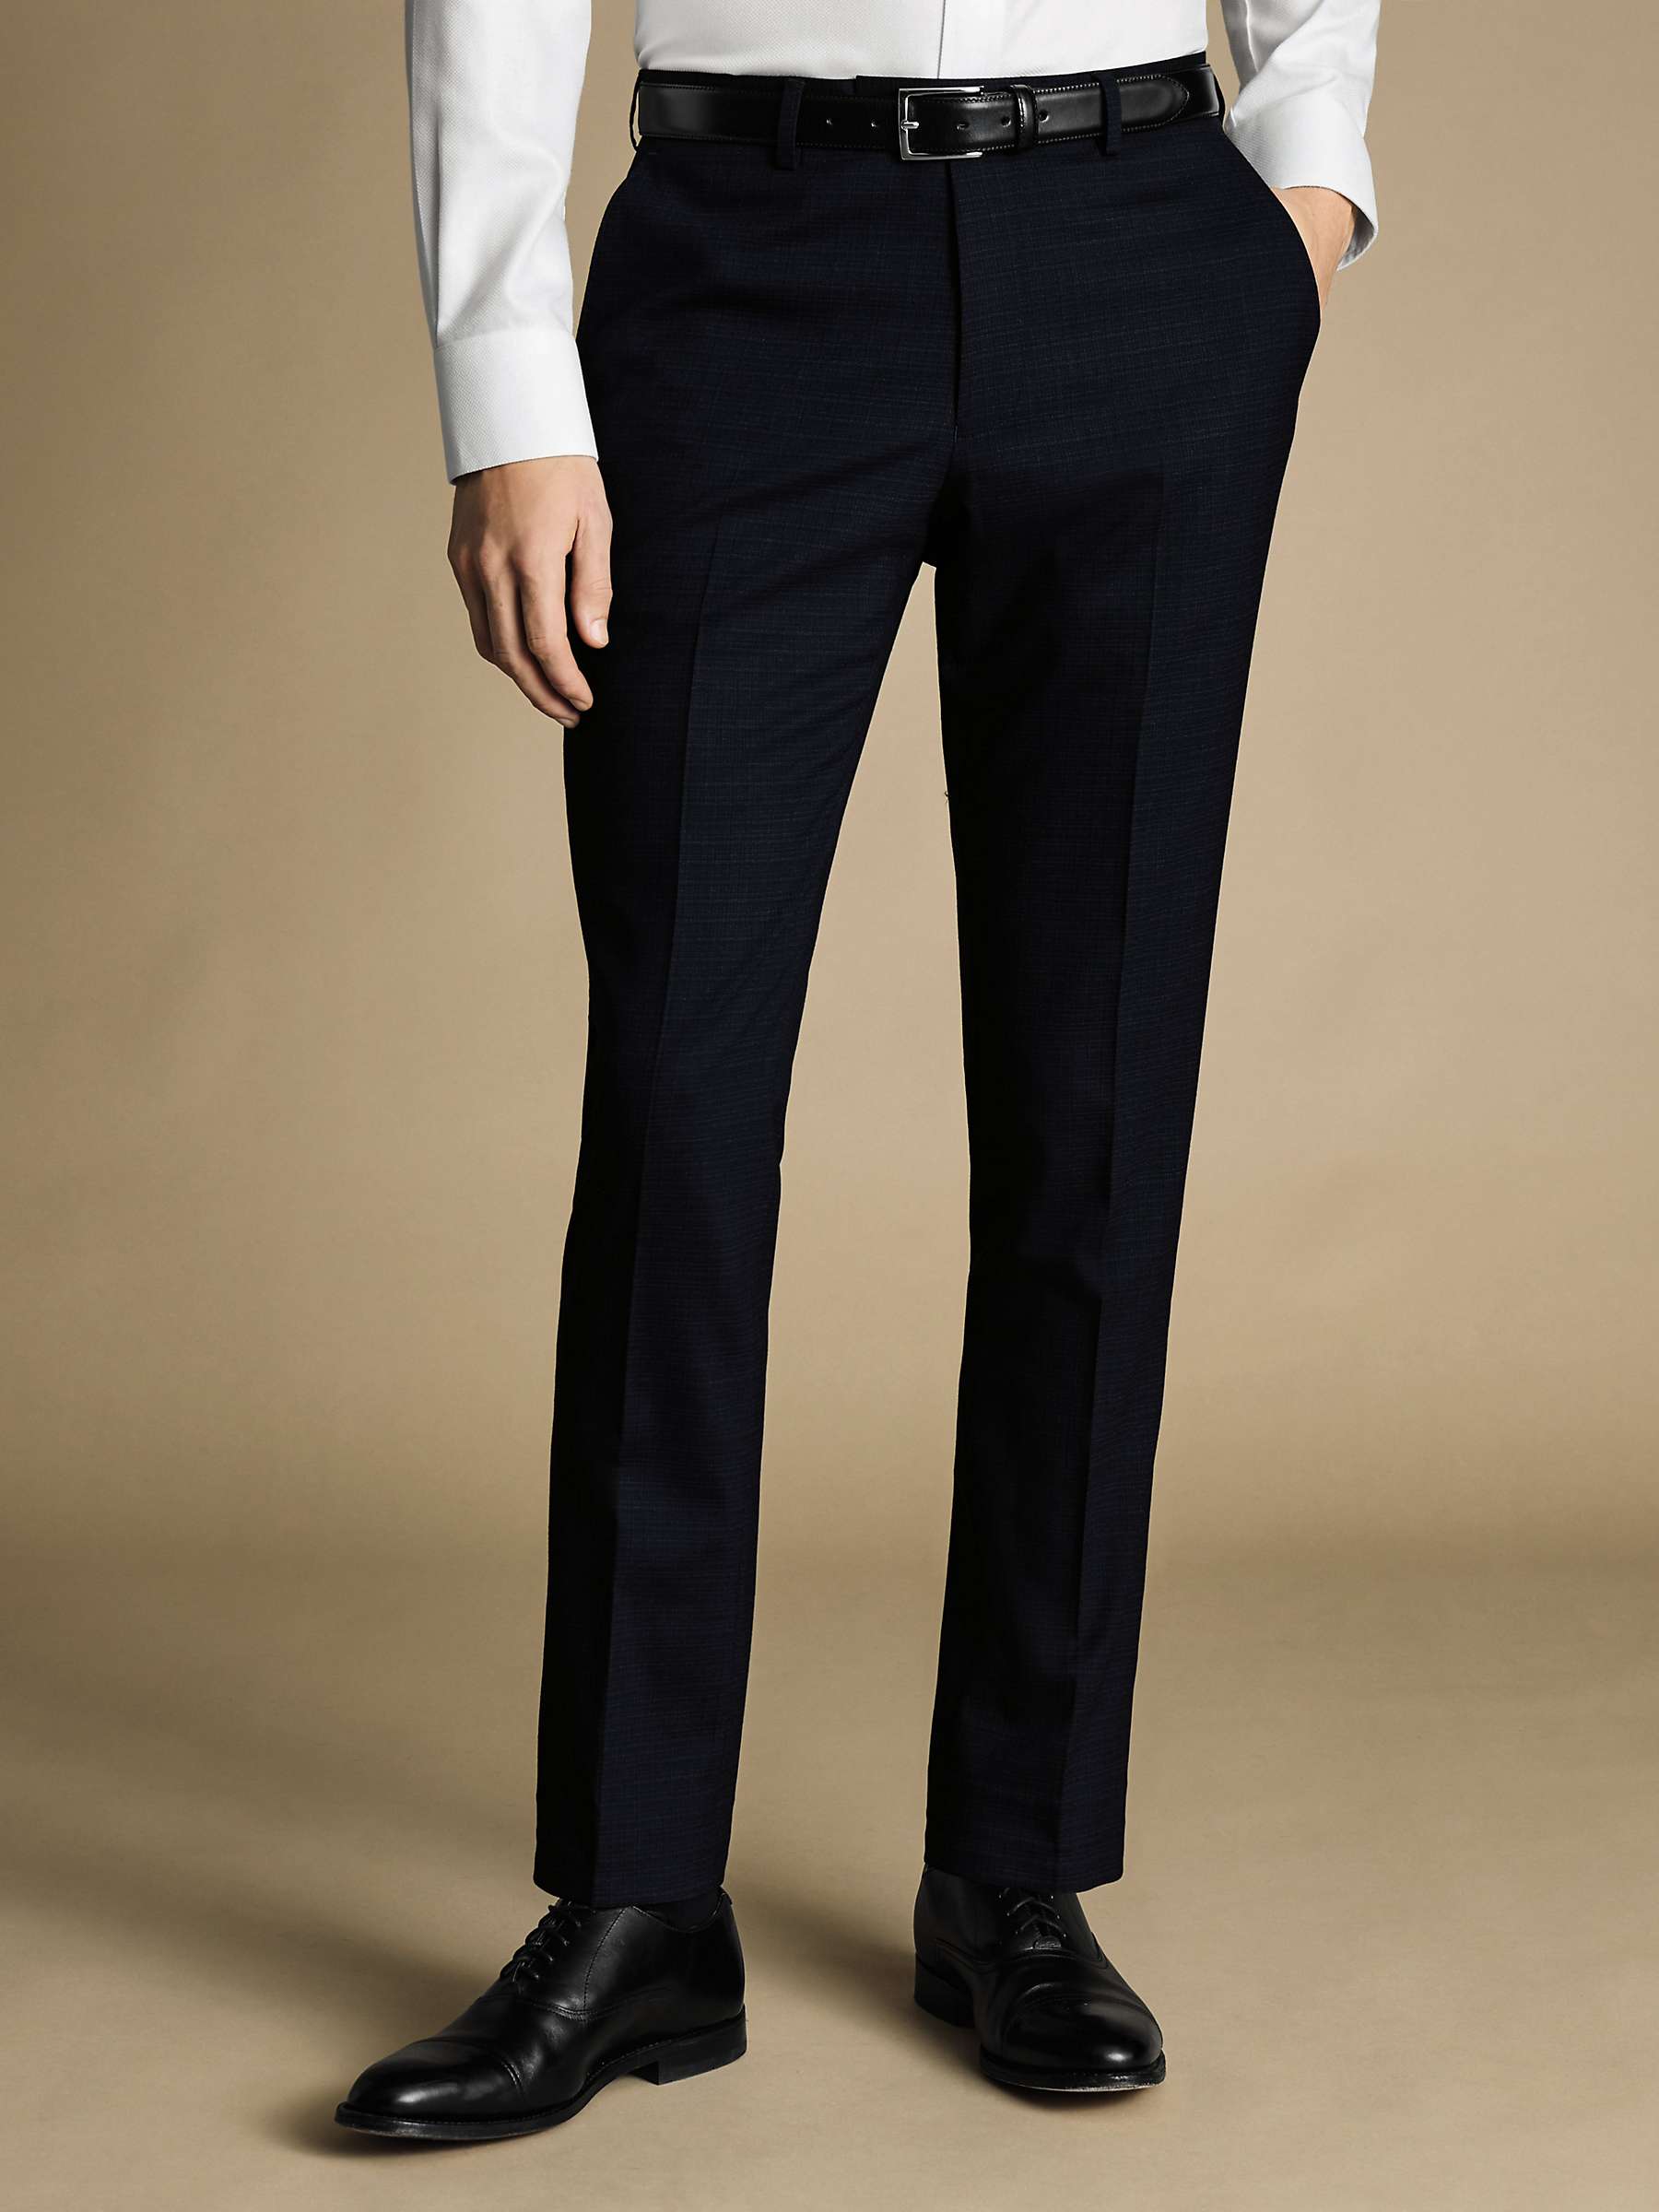 Buy Charles Tyrwhitt Micro Grid Check Slim Fit Suit Trousers Online at johnlewis.com